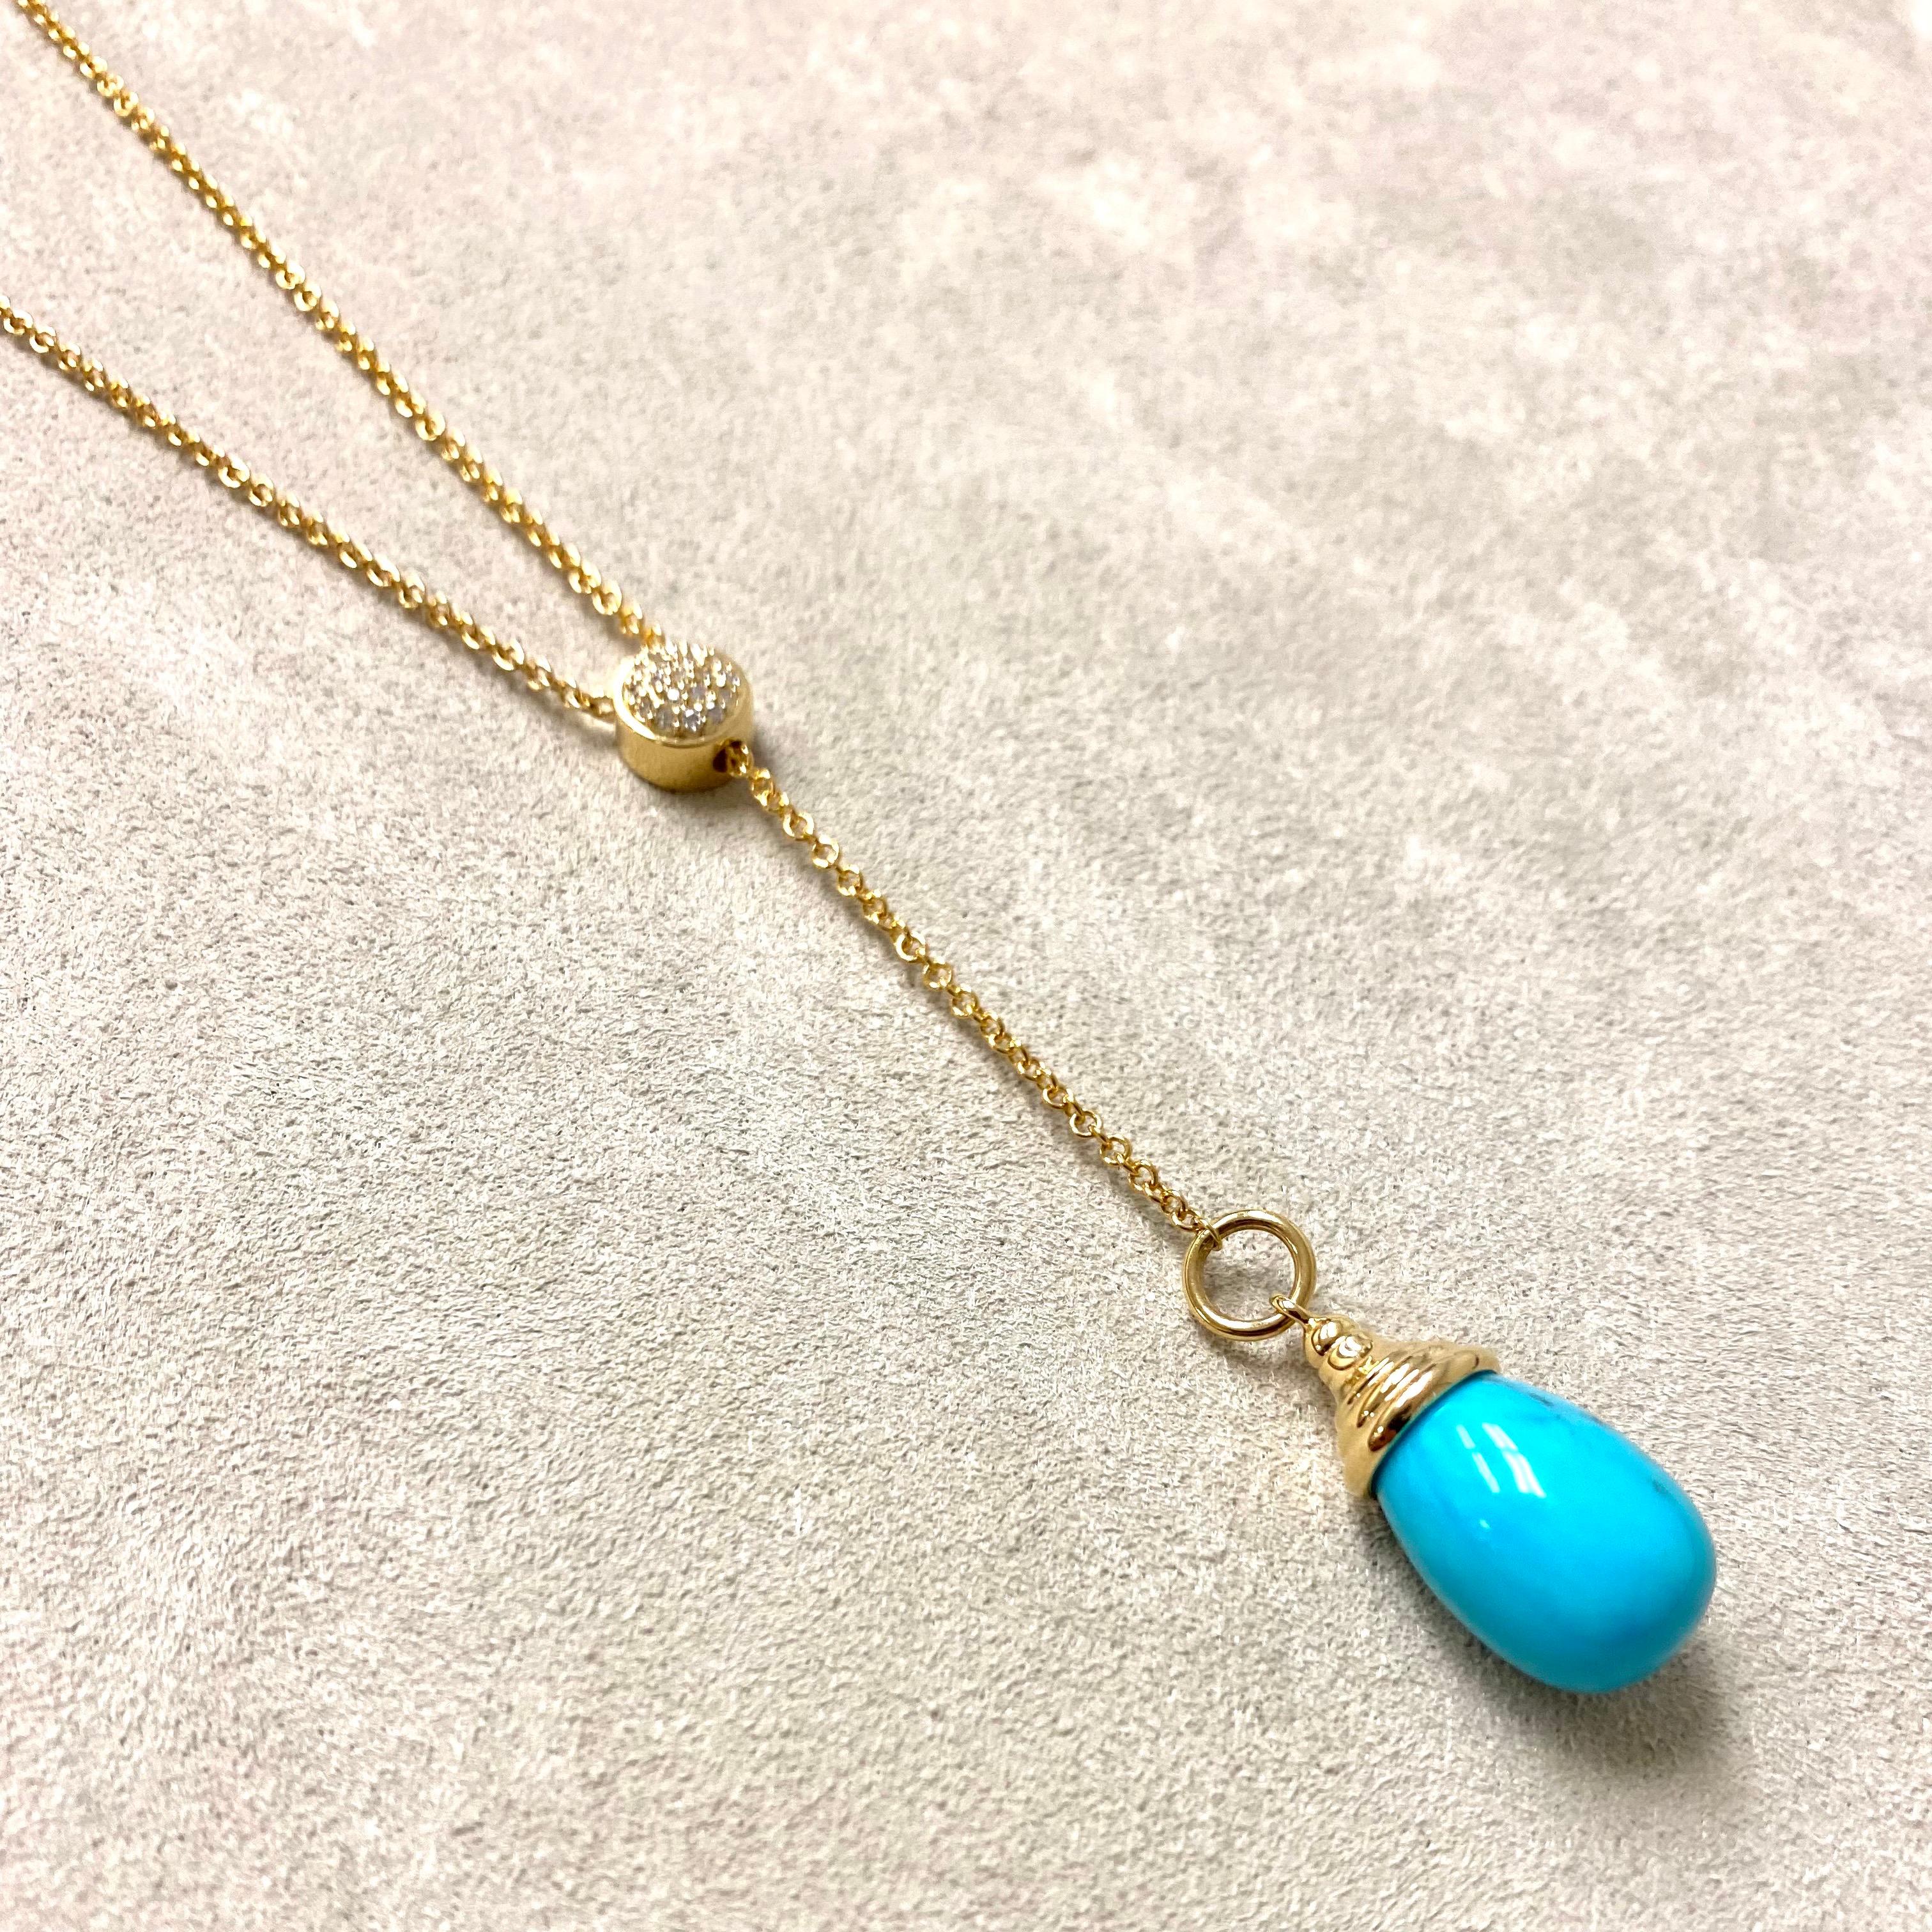 Created in 18 karat yellow gold
Sleeping Beauty Turquoise 9 carats approx.
Champagne diamonds 0.1 carat approx.
24 inch, adjustable lariat
Limited edition


About the Designers ~ Dharmesh & Namrata

Drawing inspiration from little things, Dharmesh &